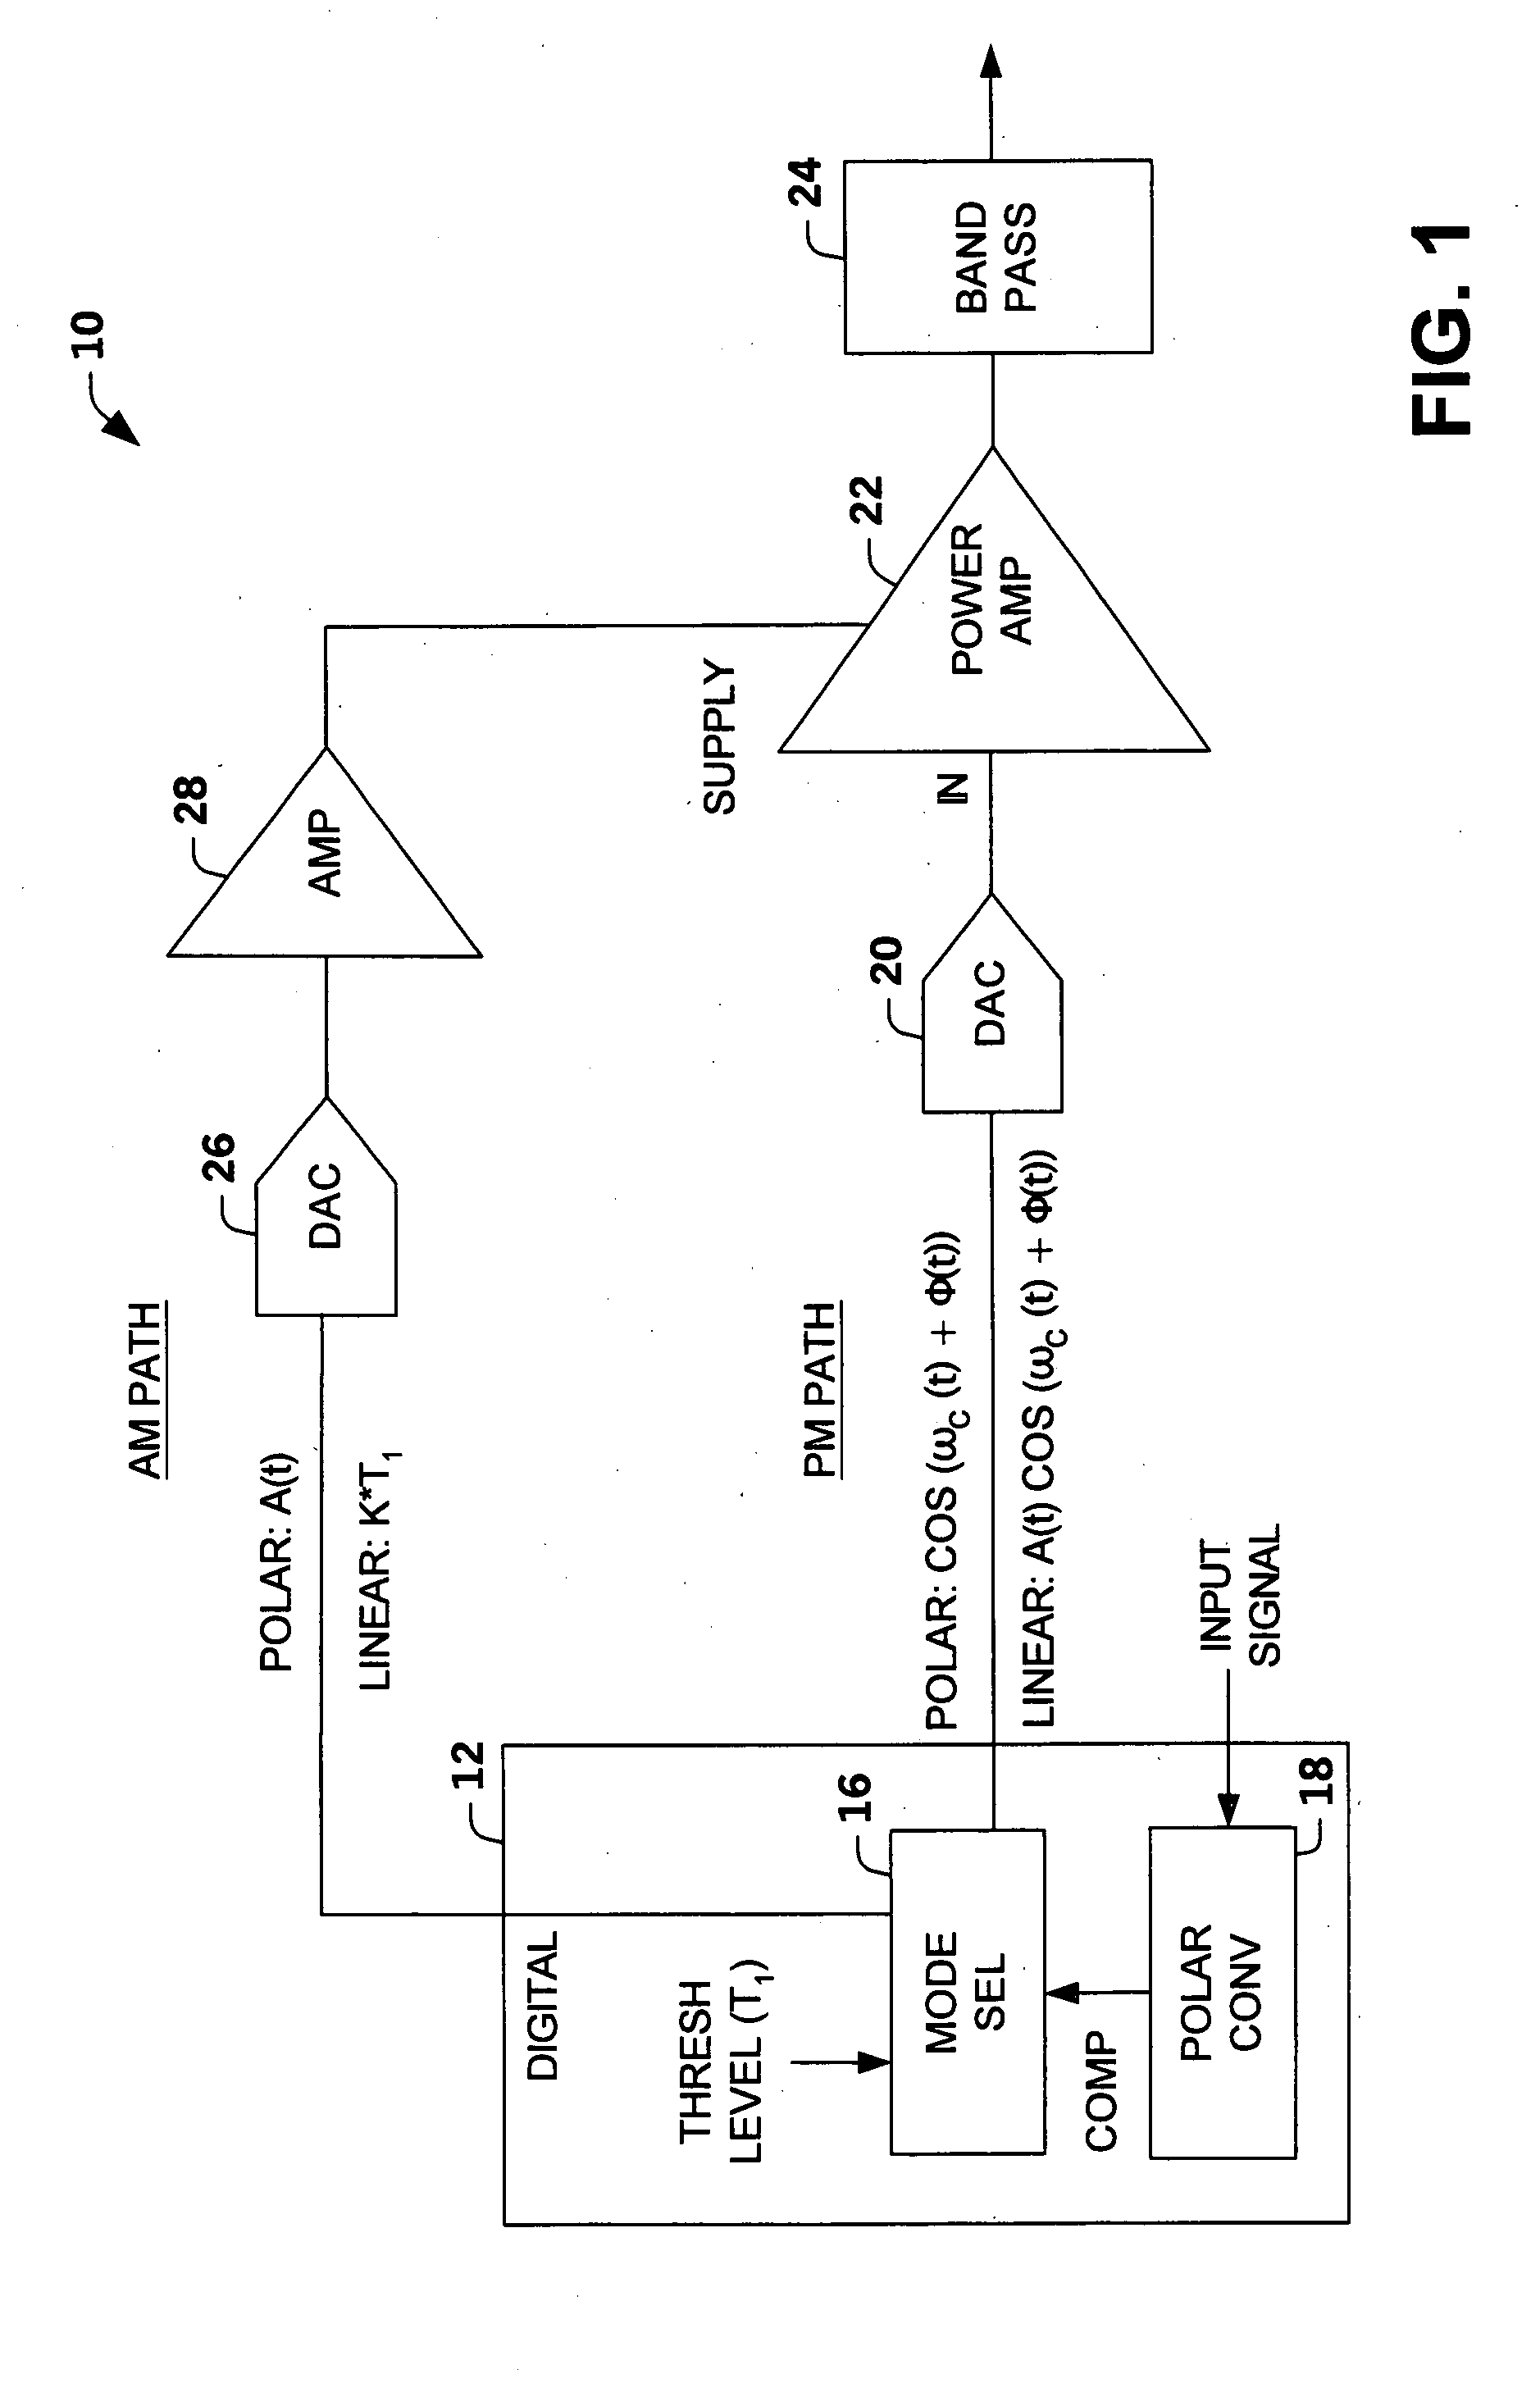 Polar and linear amplifier system